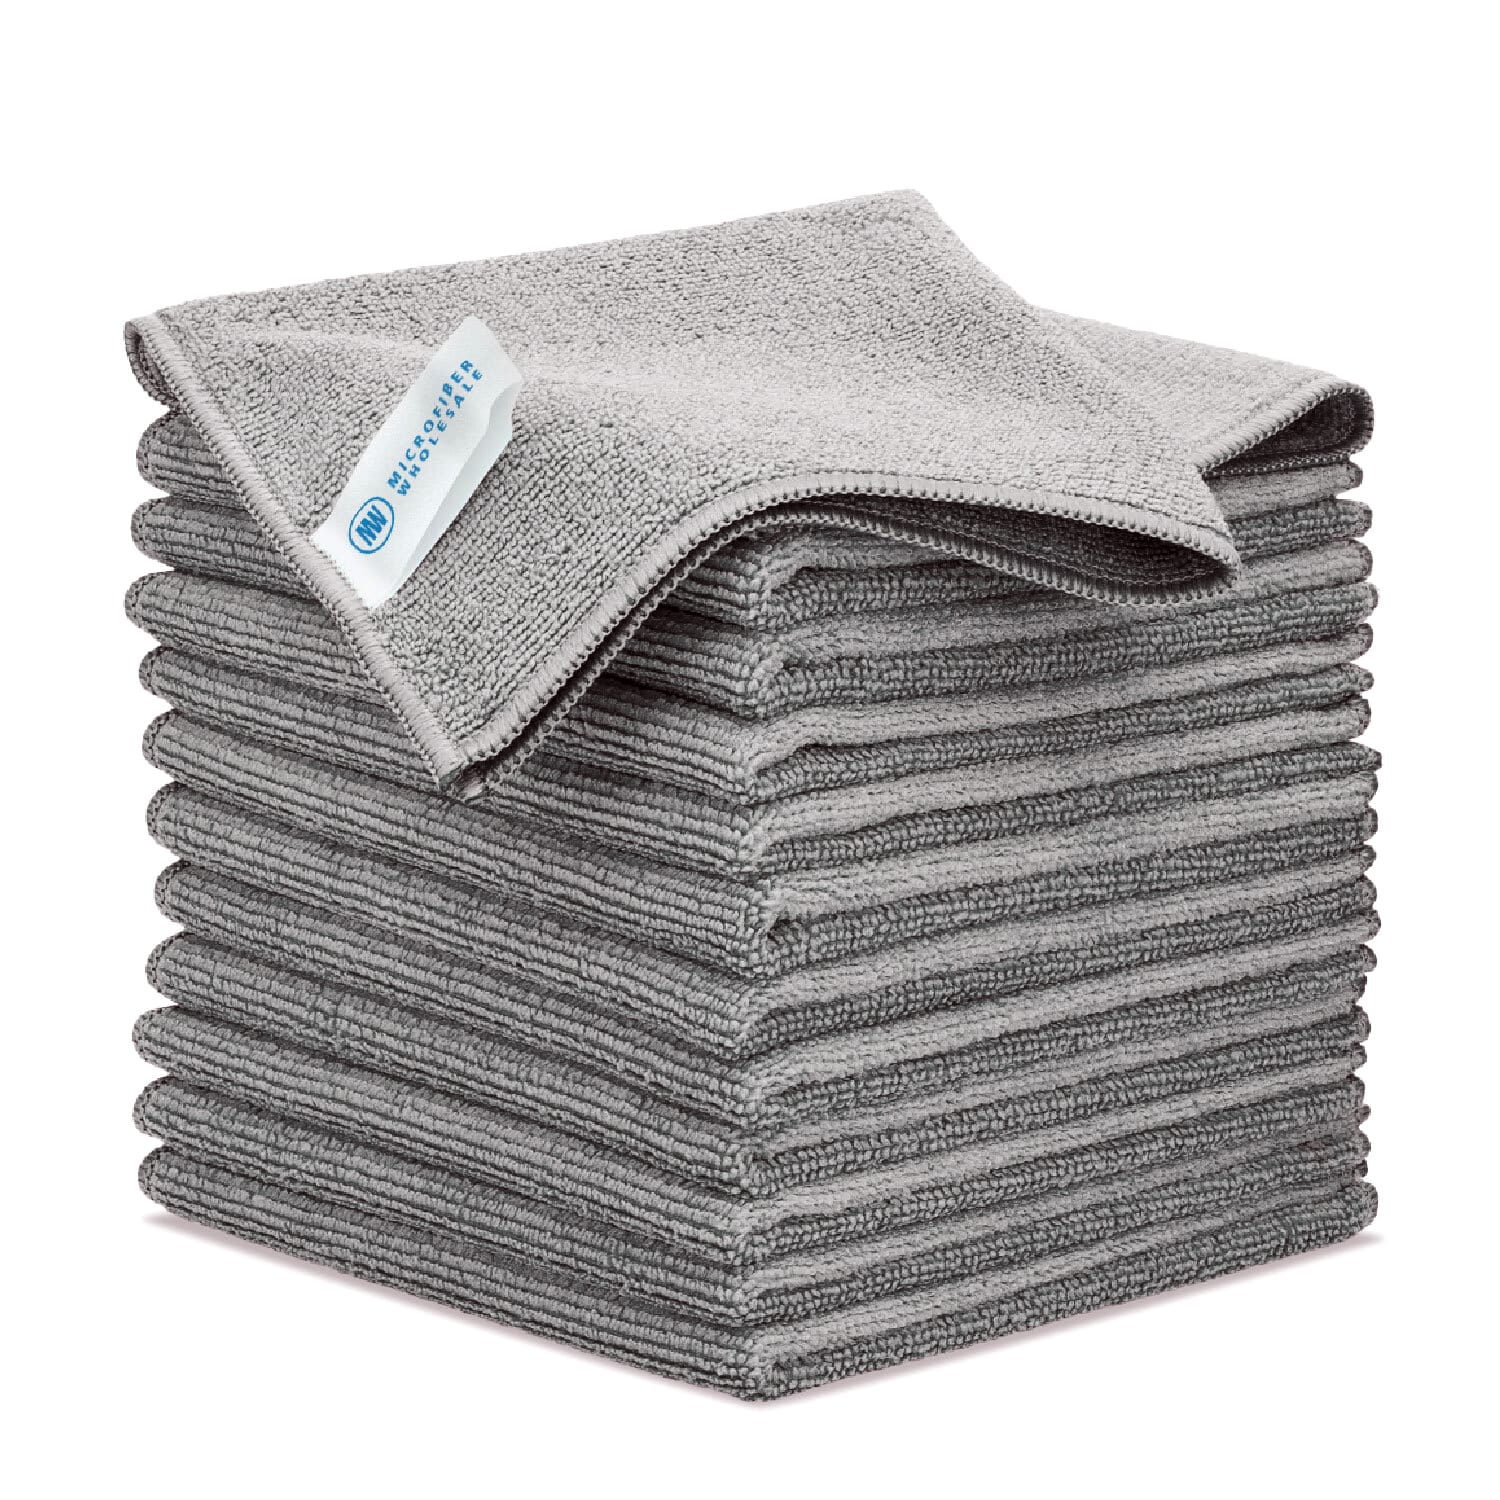 POLYTE Premium Microfiber Cleaning Cloth,12 x 12 in, 12 Pack (Gray)